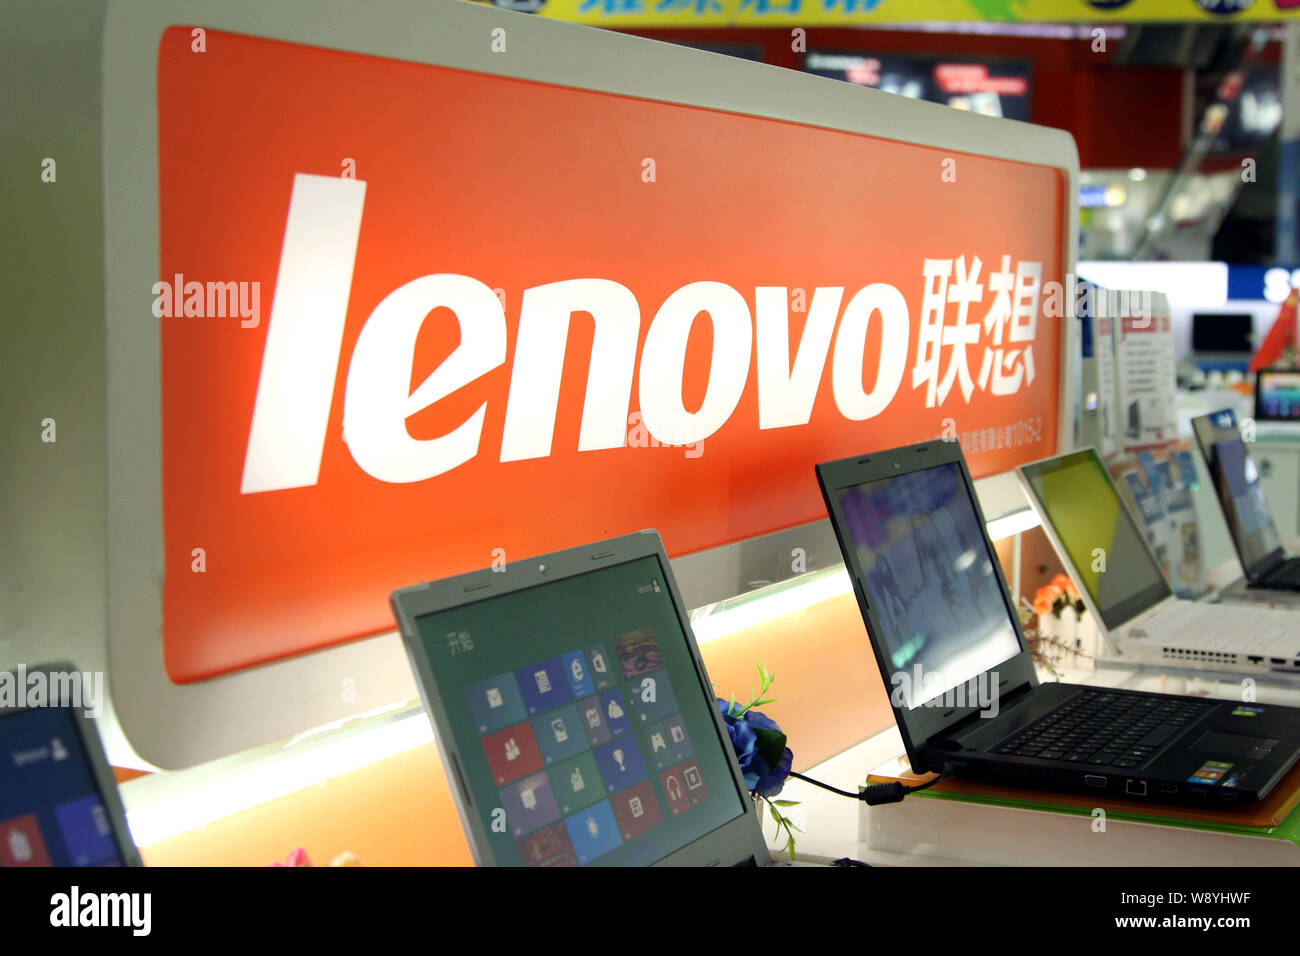 --FILE--Laptop computers of Lenovo are for sale at a store in Shanghai, China, 22 January 2014.   A decade after Lenovo Group Ltd. bought Internationa Stock Photo